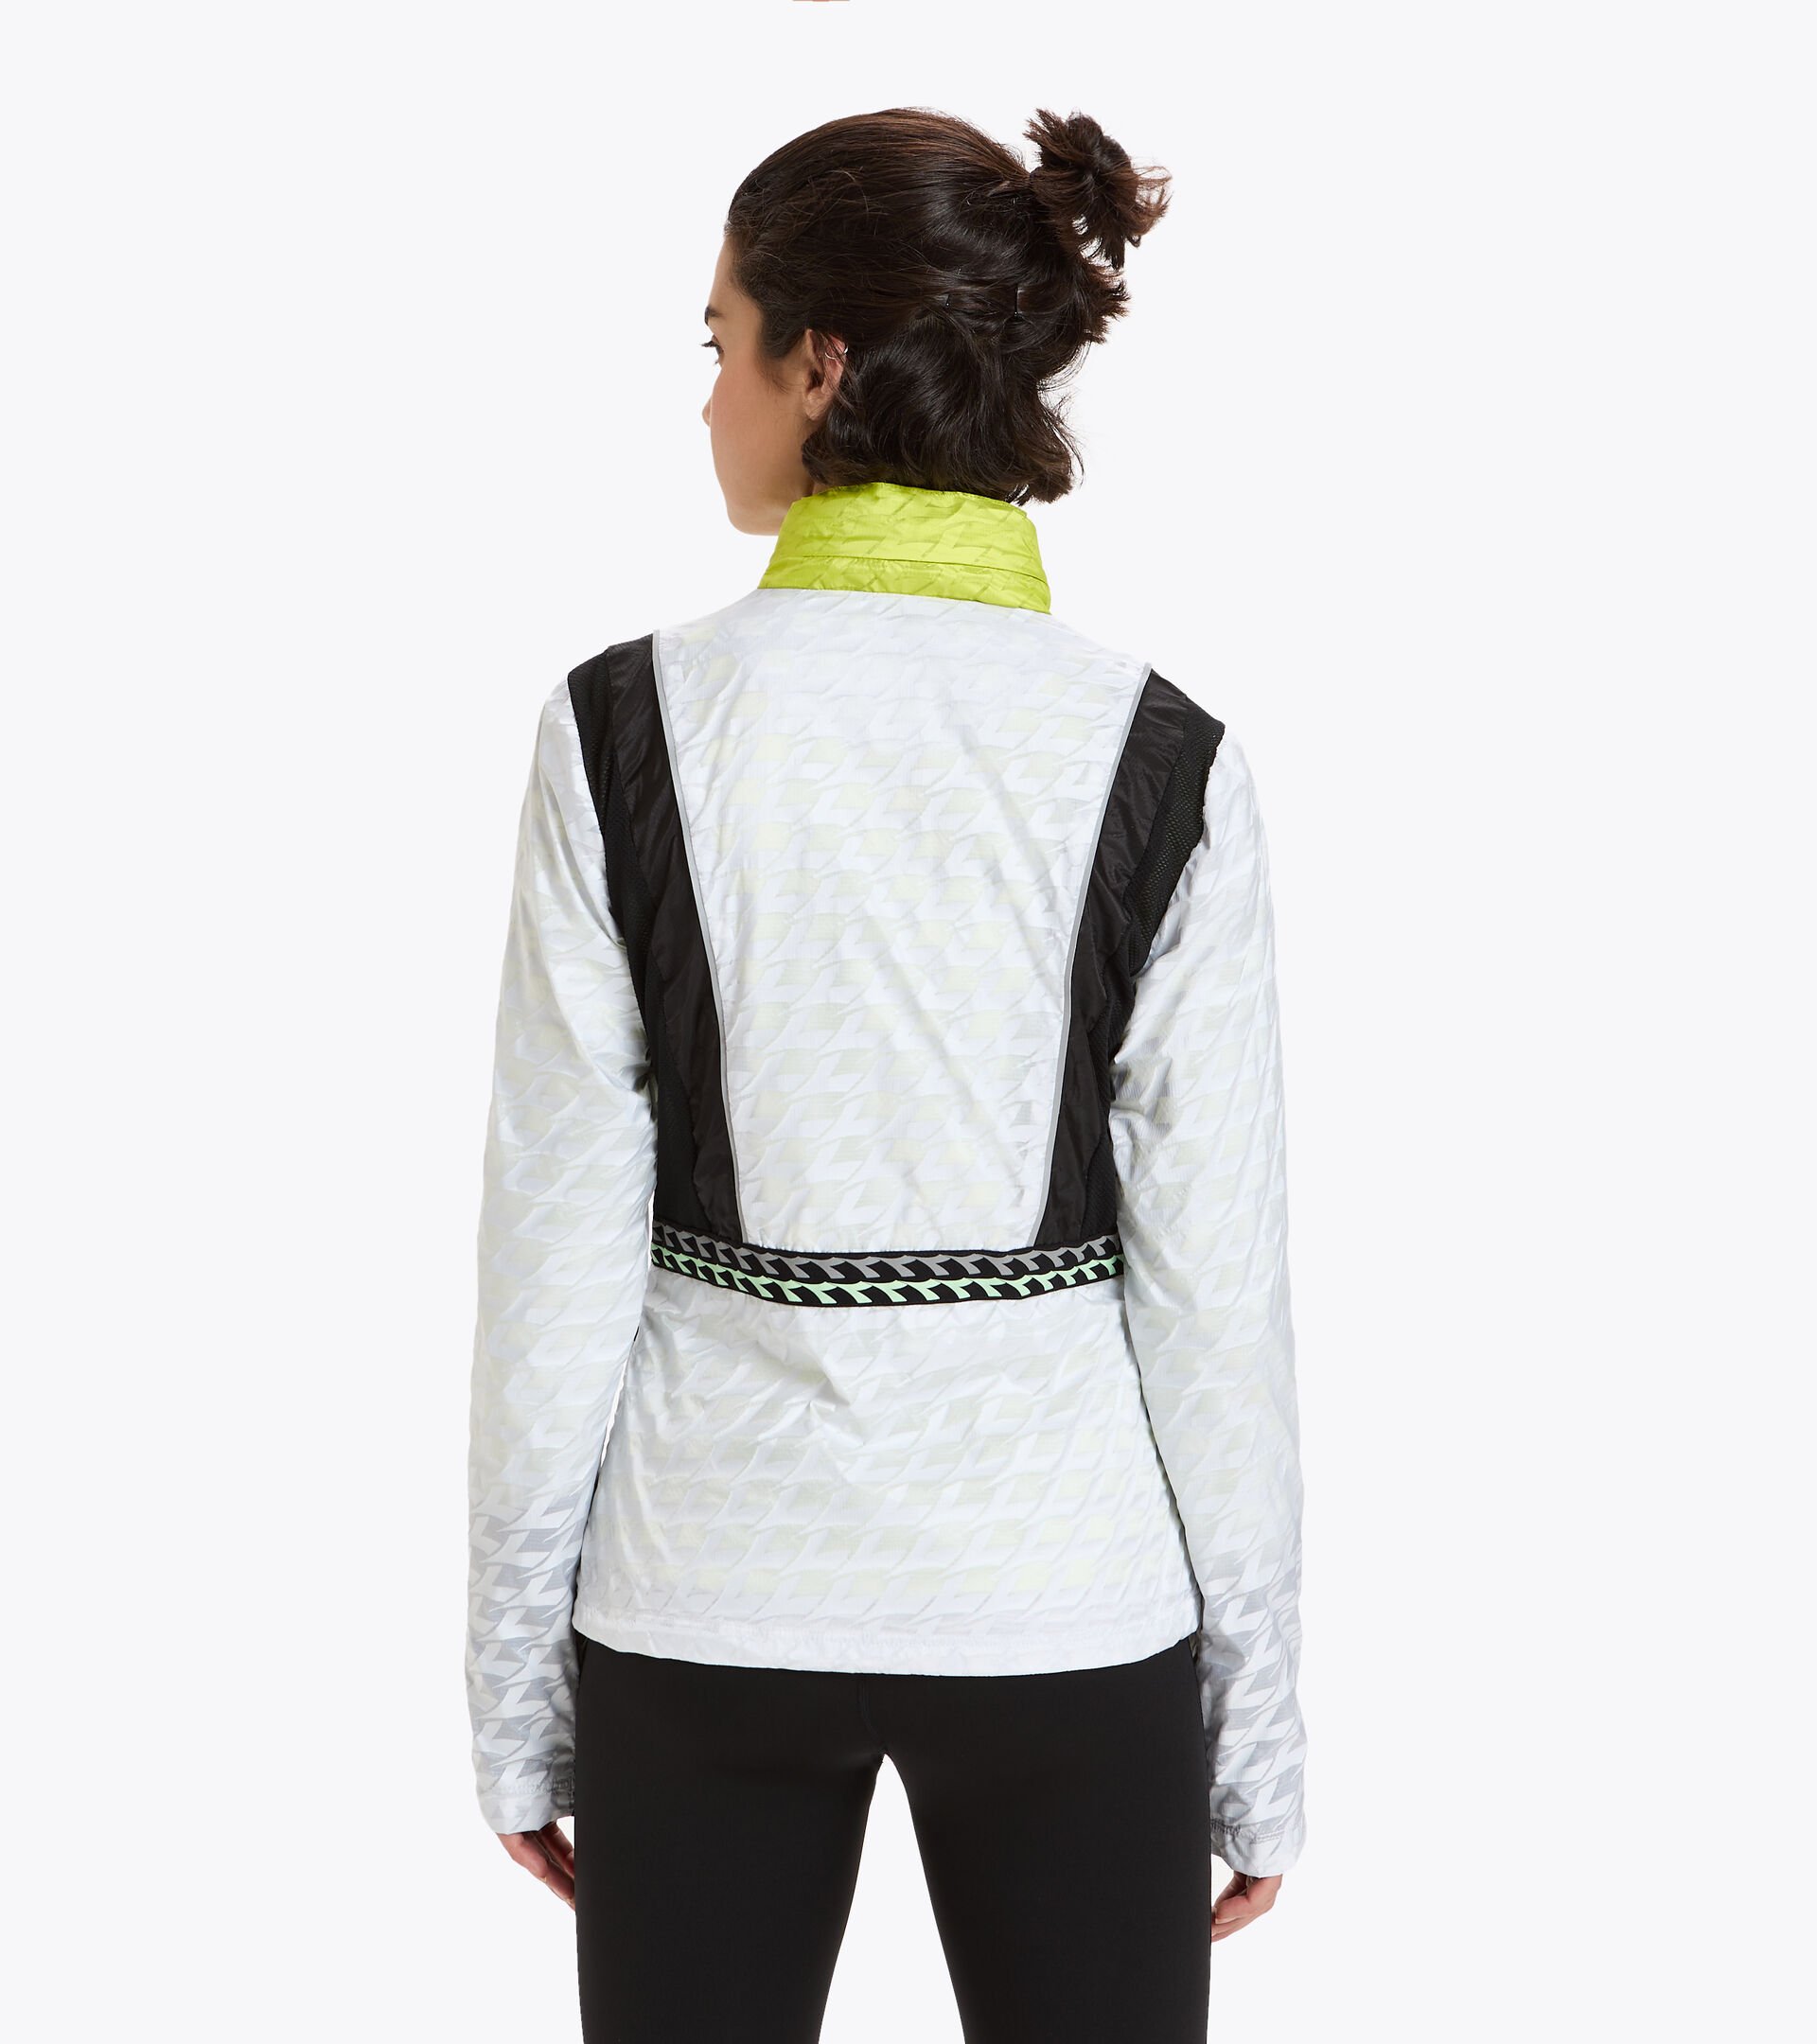 Isotherm-Laufjacke - Damen L. ISOTHERMAL JACKET BE ONE STRAHLEND WEISSE - Diadora